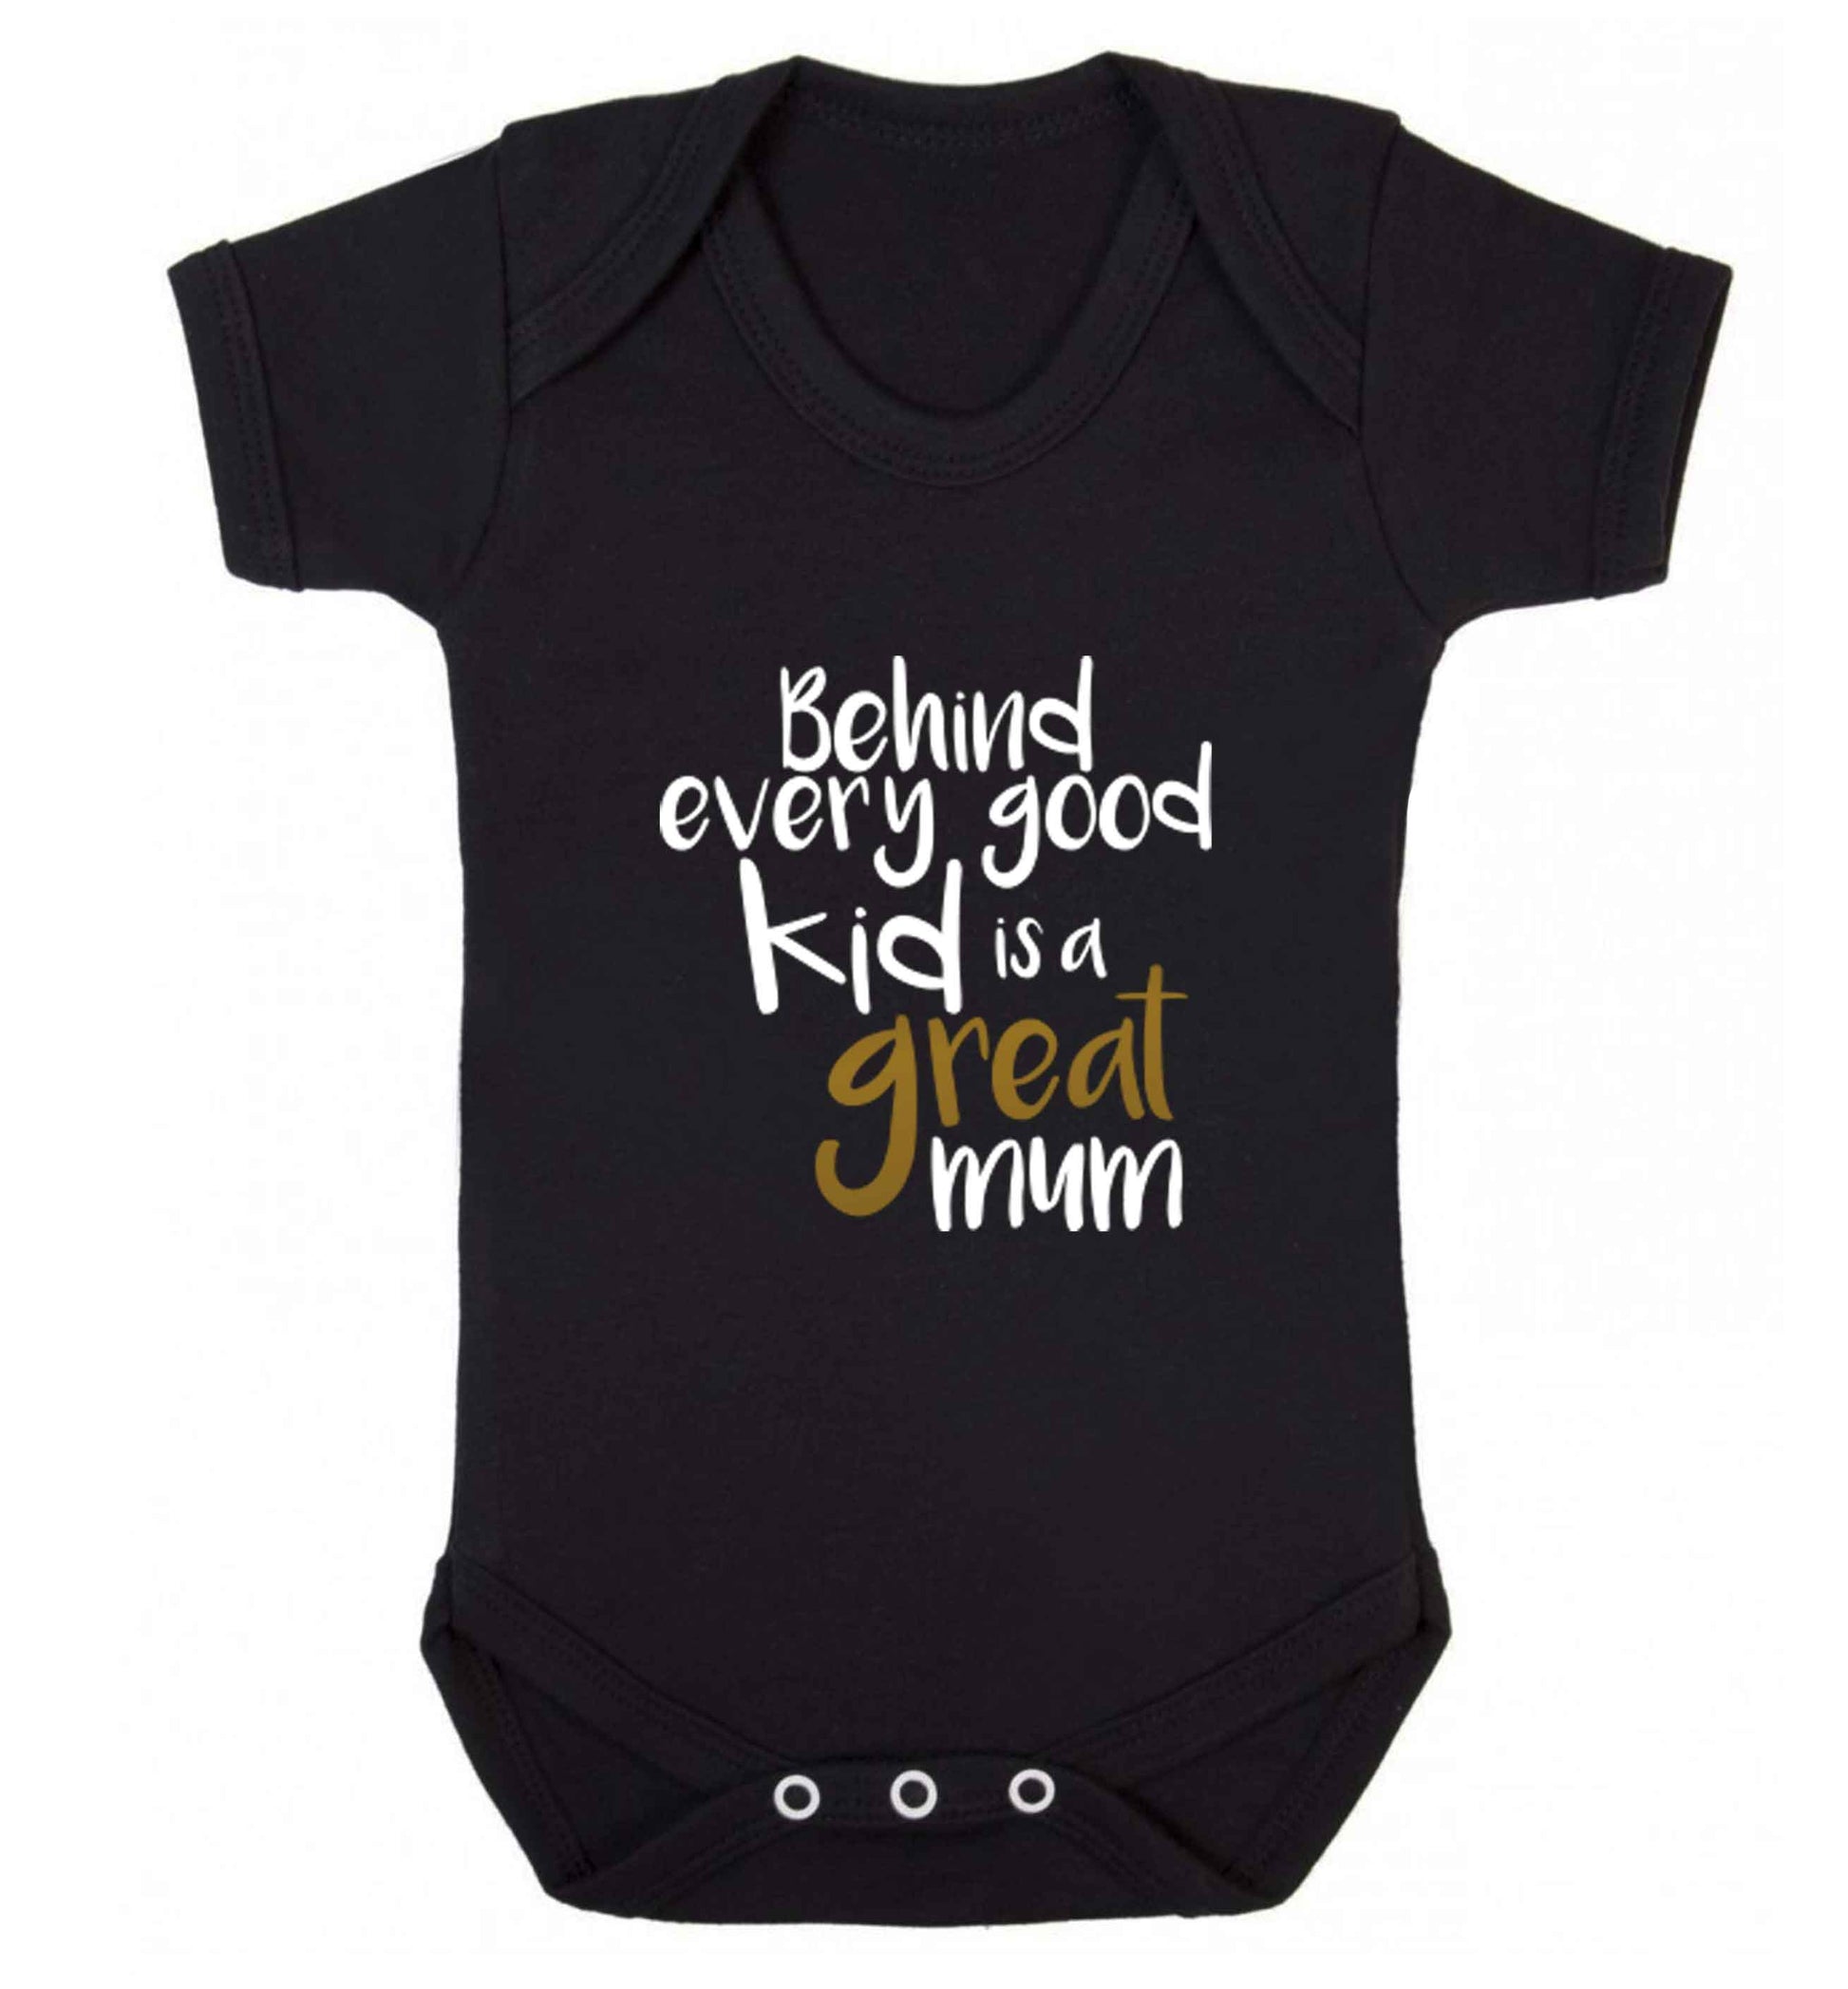 Behind every good kid is a great mum baby vest black 18-24 months